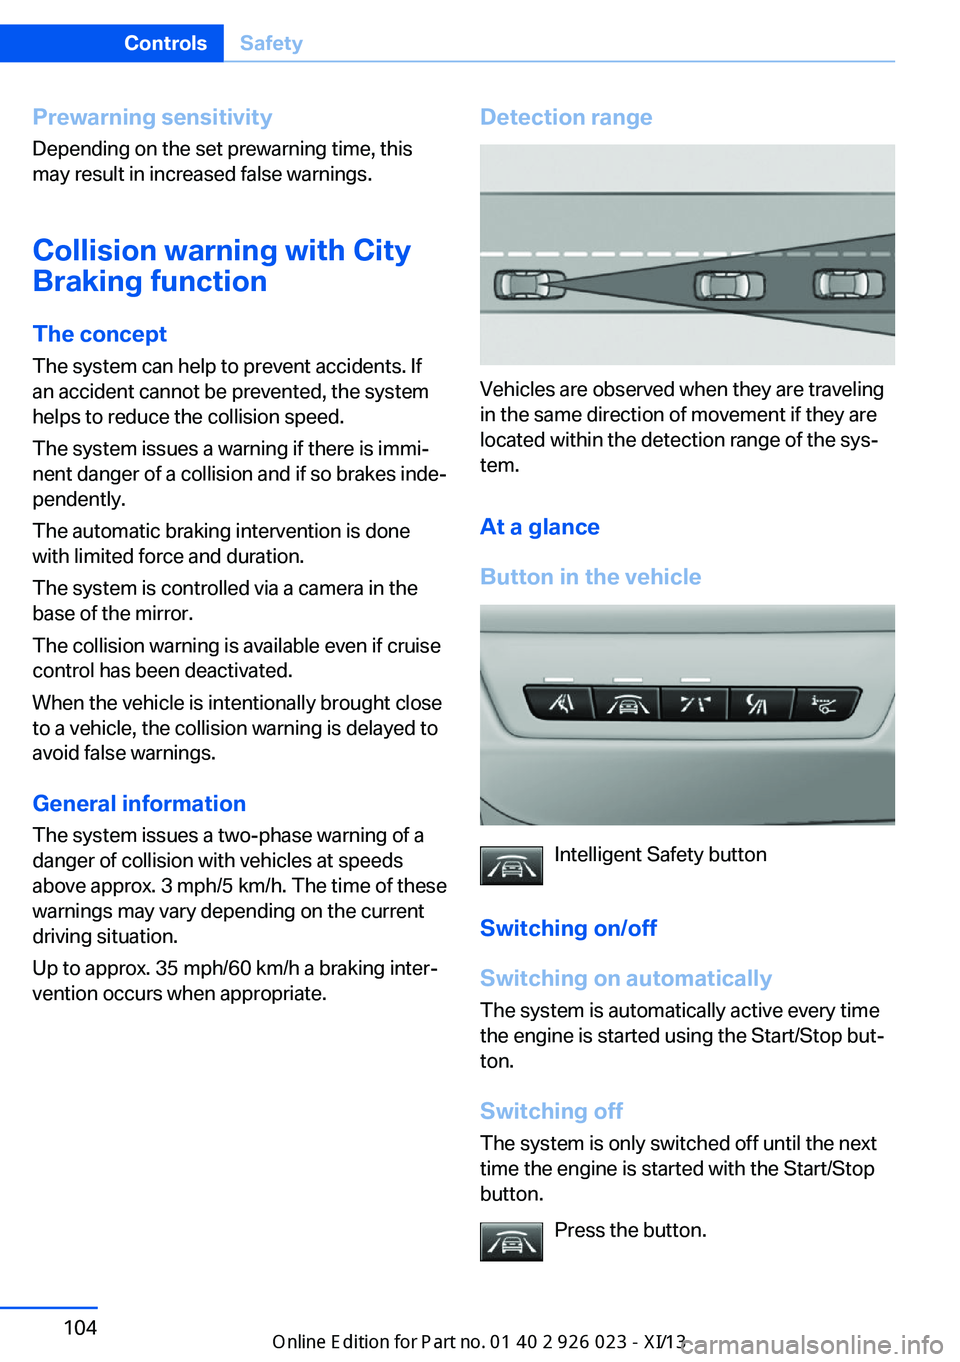 BMW 6 SERIES GRAN COUPE 2013 F12 Owners Guide Prewarning sensitivityDepending on the set prewarning time, this
may result in increased false warnings.
Collision warning with City
Braking function
The concept
The system can help to prevent acciden